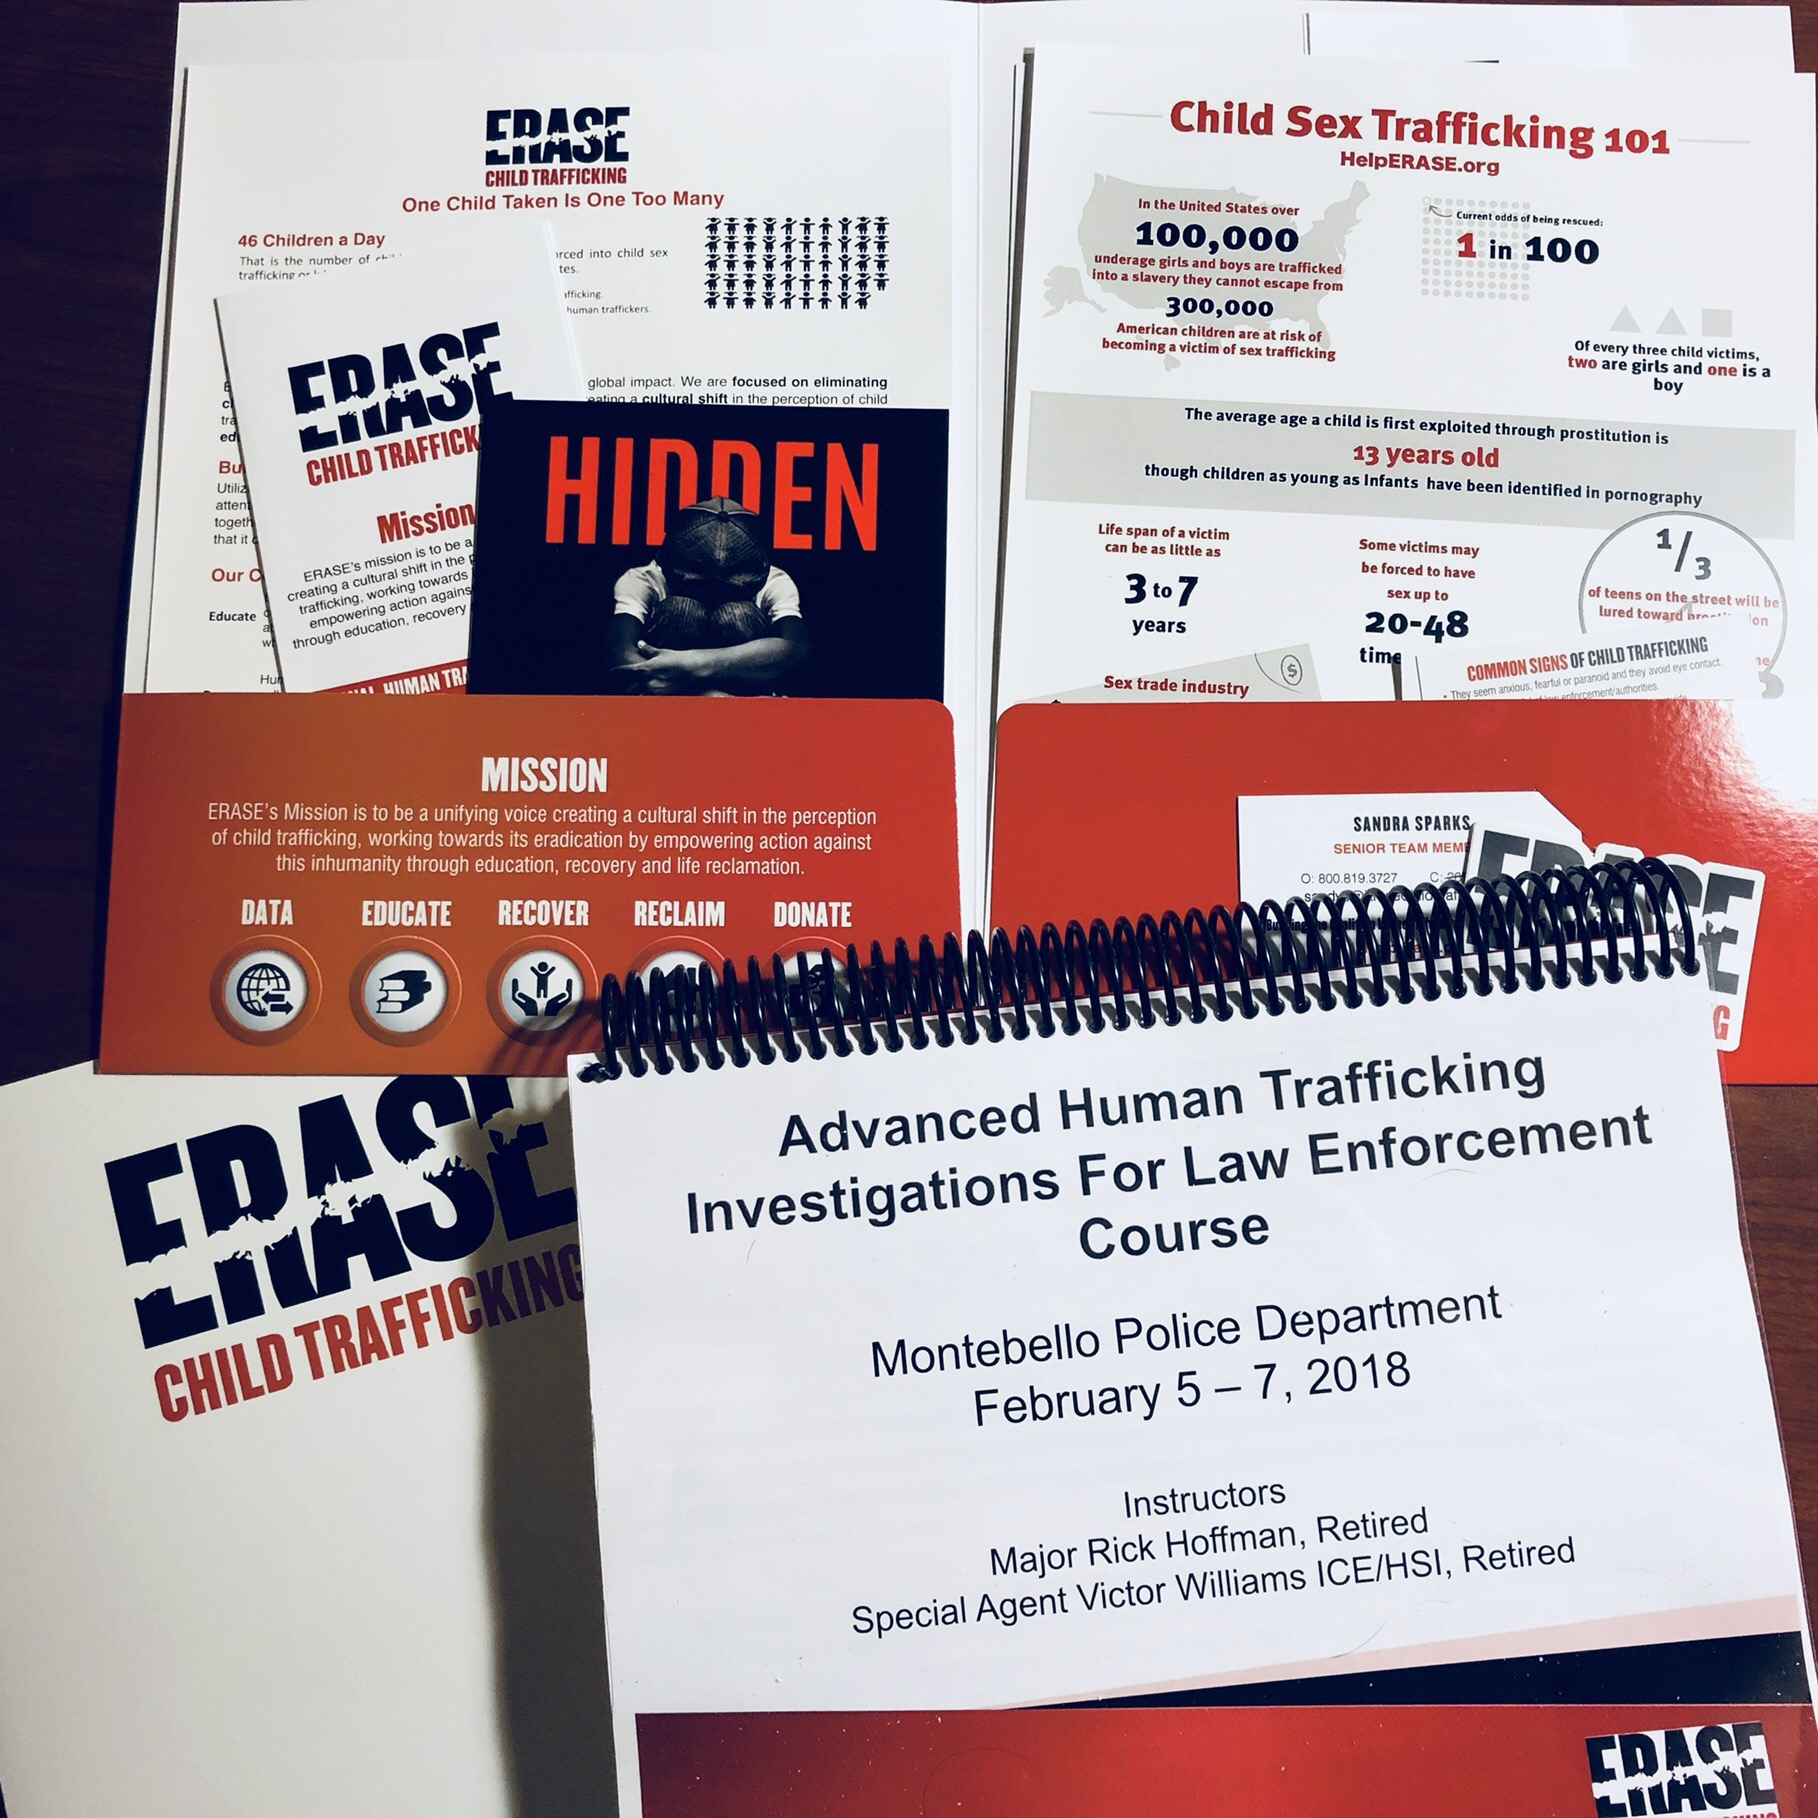 Human Trafficking Investigations Law Enforcement Course